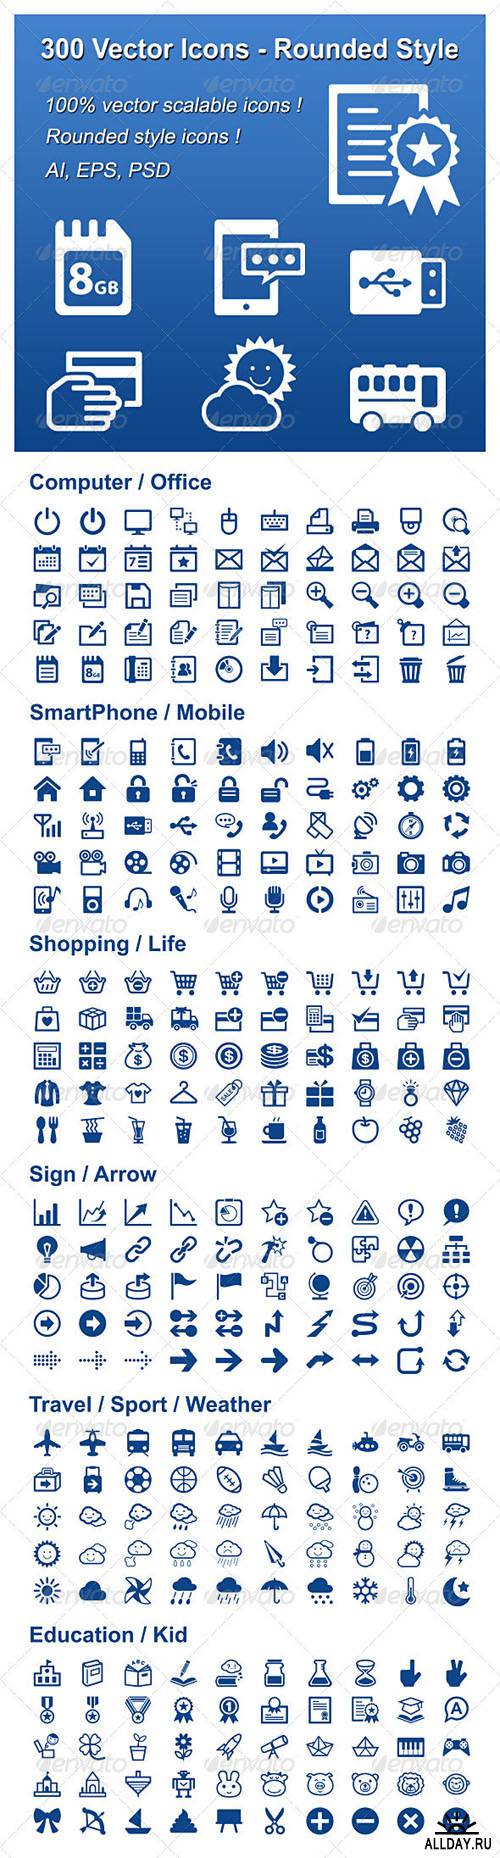 300 Vector Icons - Rounded Style